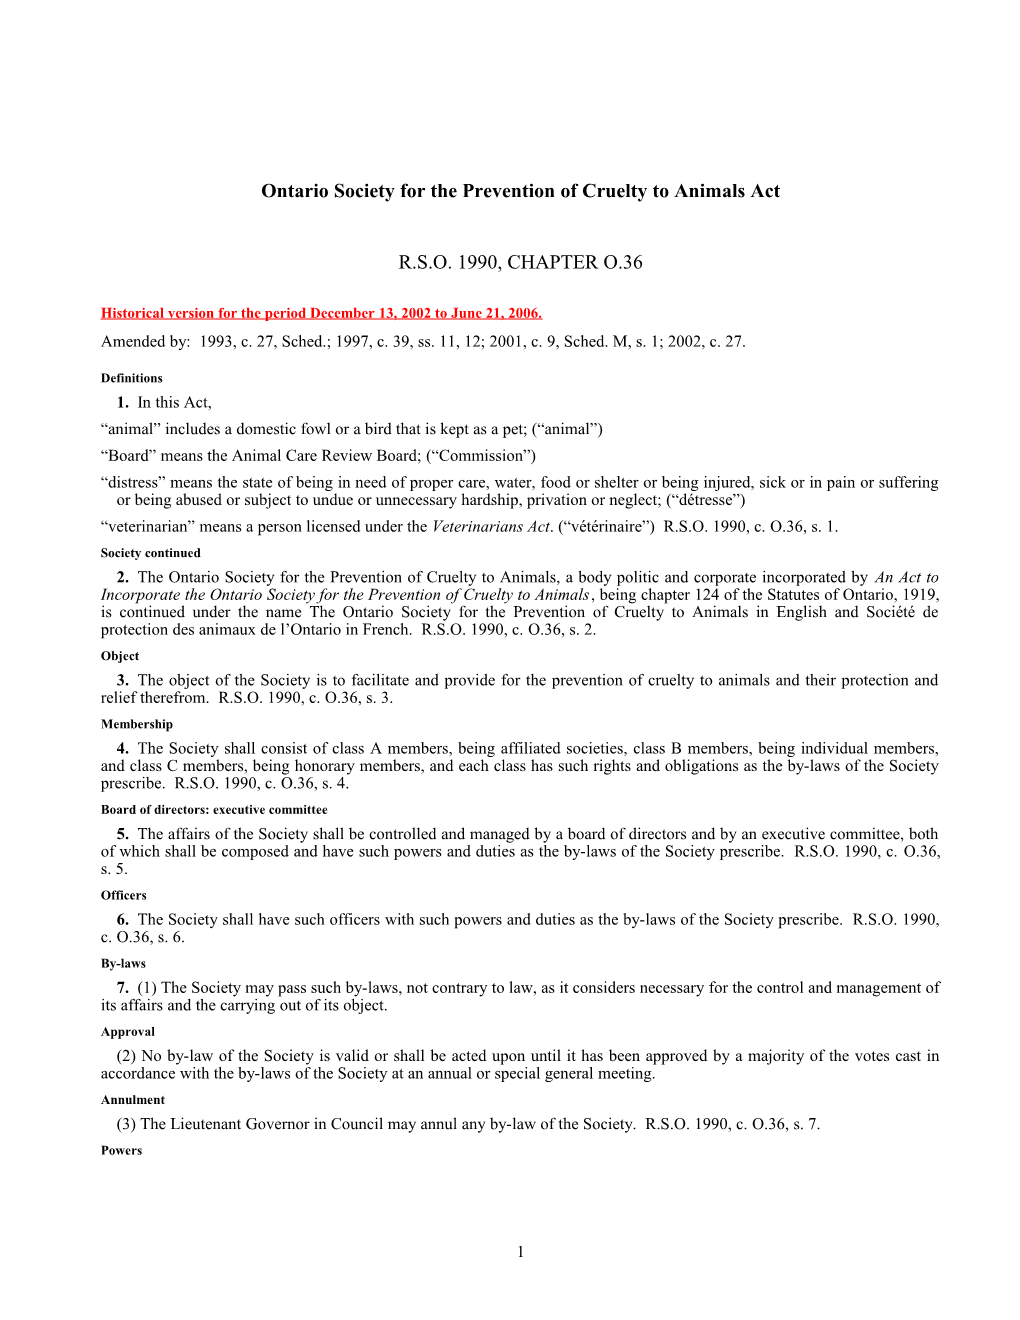 Ontario Society for the Prevention of Cruelty to Animals Act, R.S.O. 1990, C. O.36